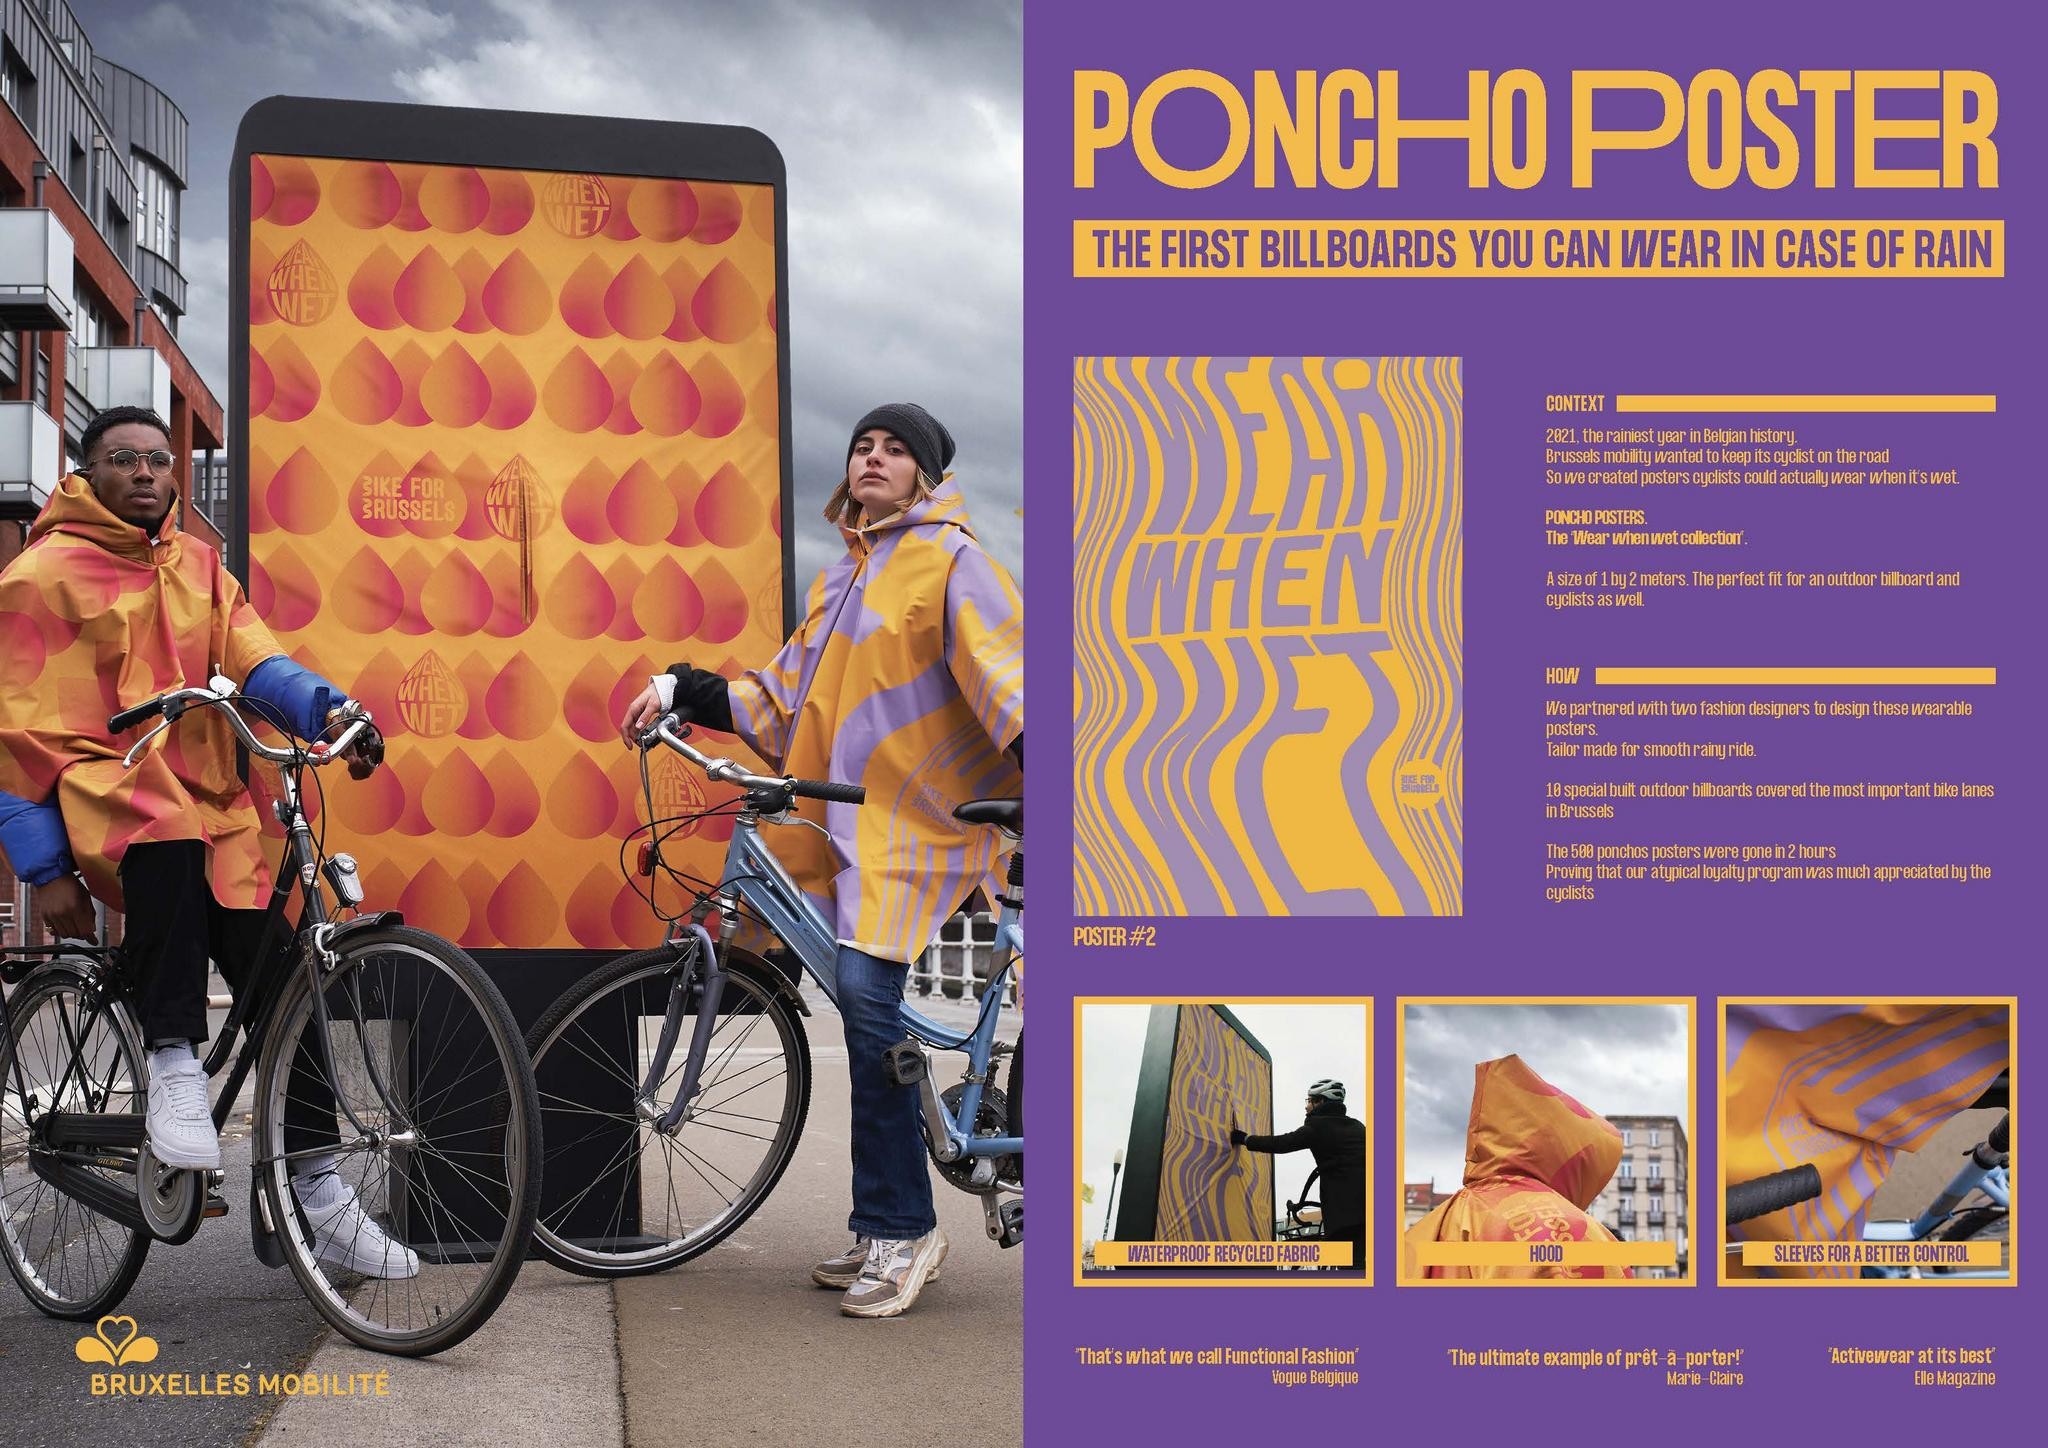 The Poncho Poster